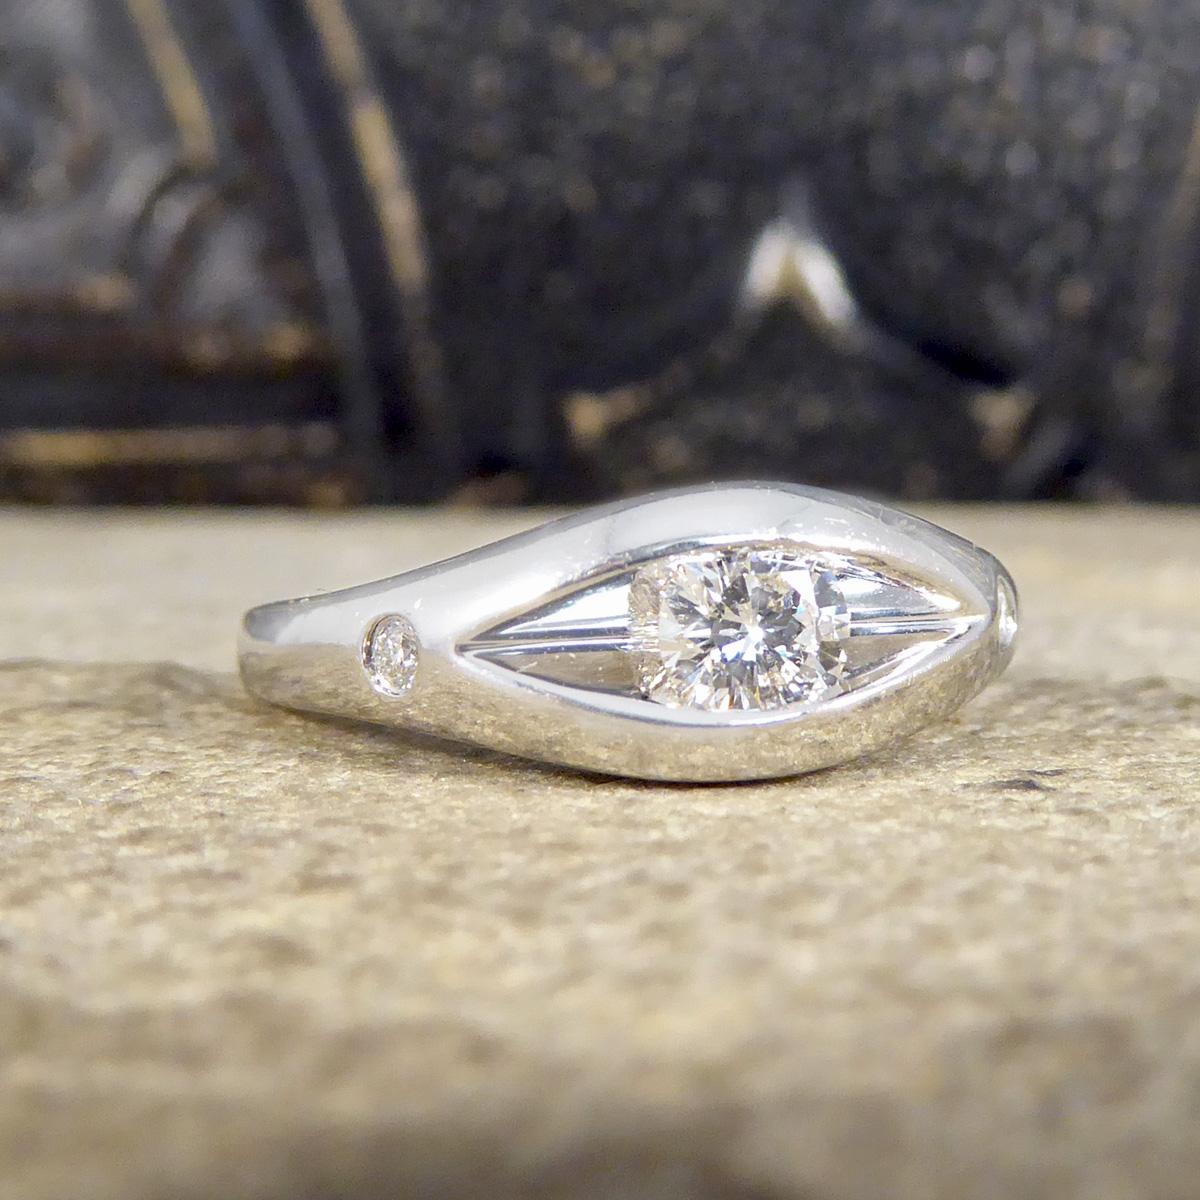 This beautifully sparkly and unusual ring holds a Brilliant cut Diamond weighing 0.30ct. The Diamond is set into the band in a rub over setting with the rub over points at the top and bottom having a space either side of the Diamonds giving the ring